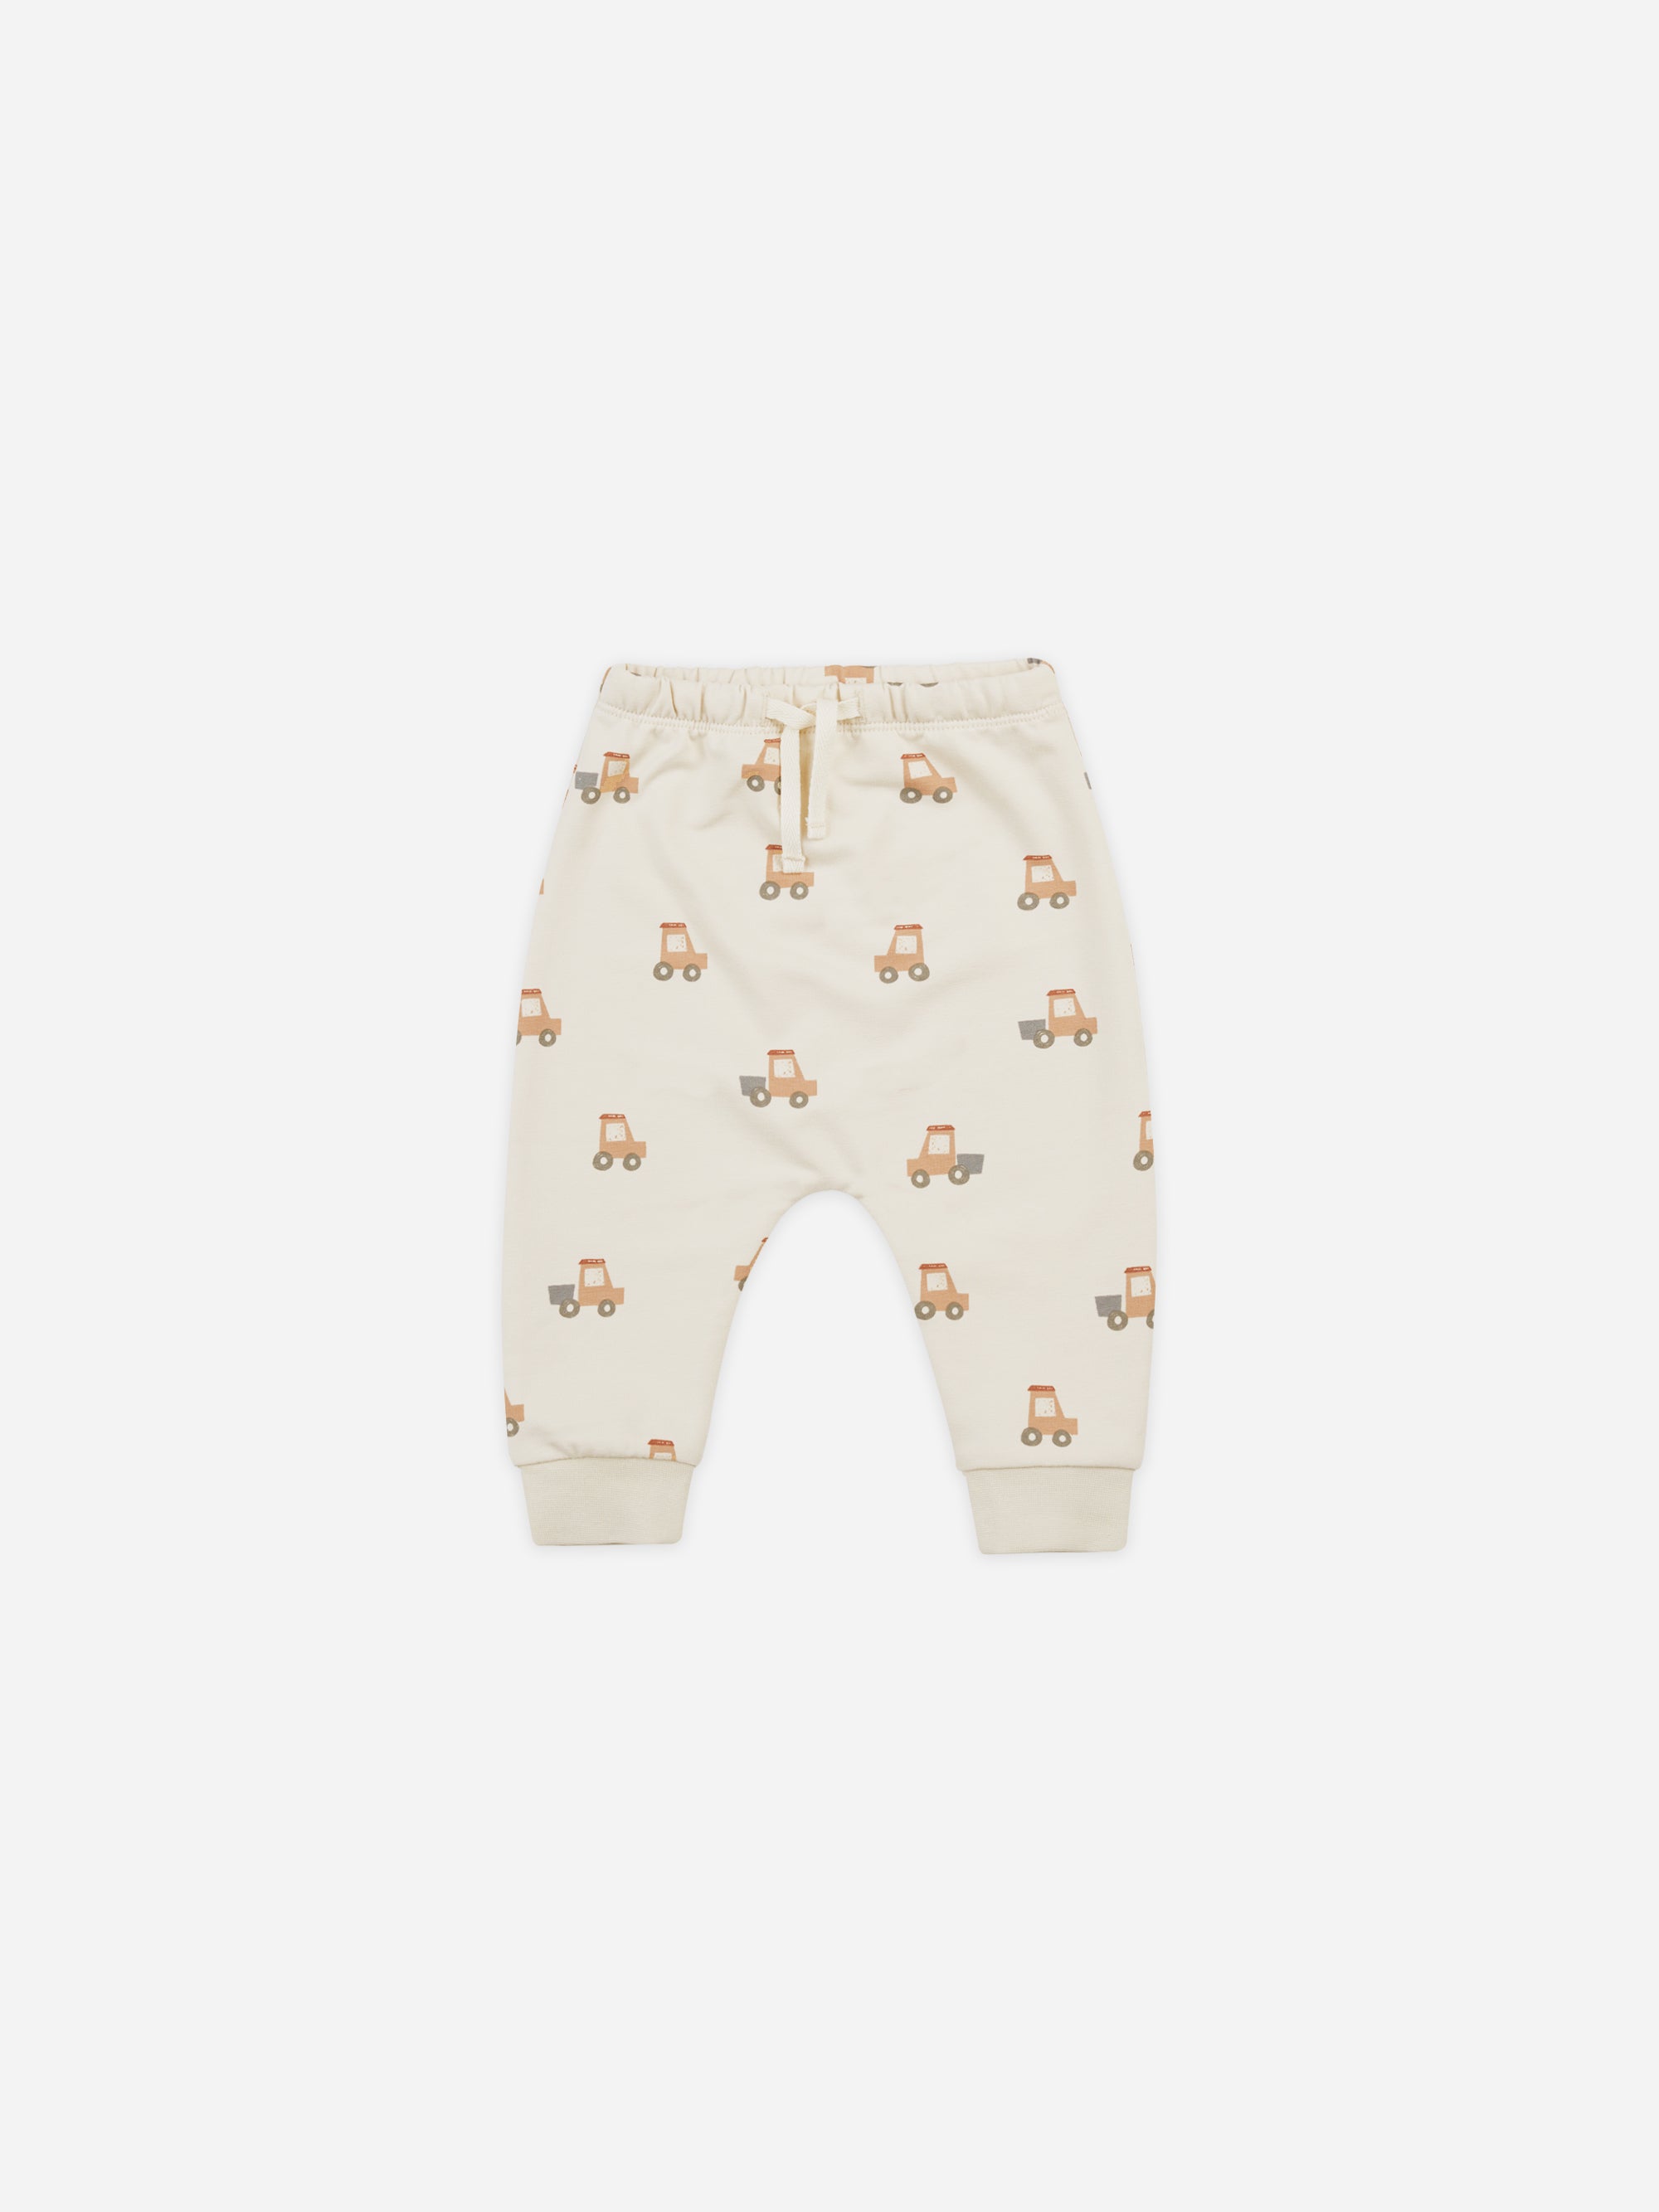 Sweatpant || Tractors - Rylee + Cru | Kids Clothes | Trendy Baby Clothes | Modern Infant Outfits |